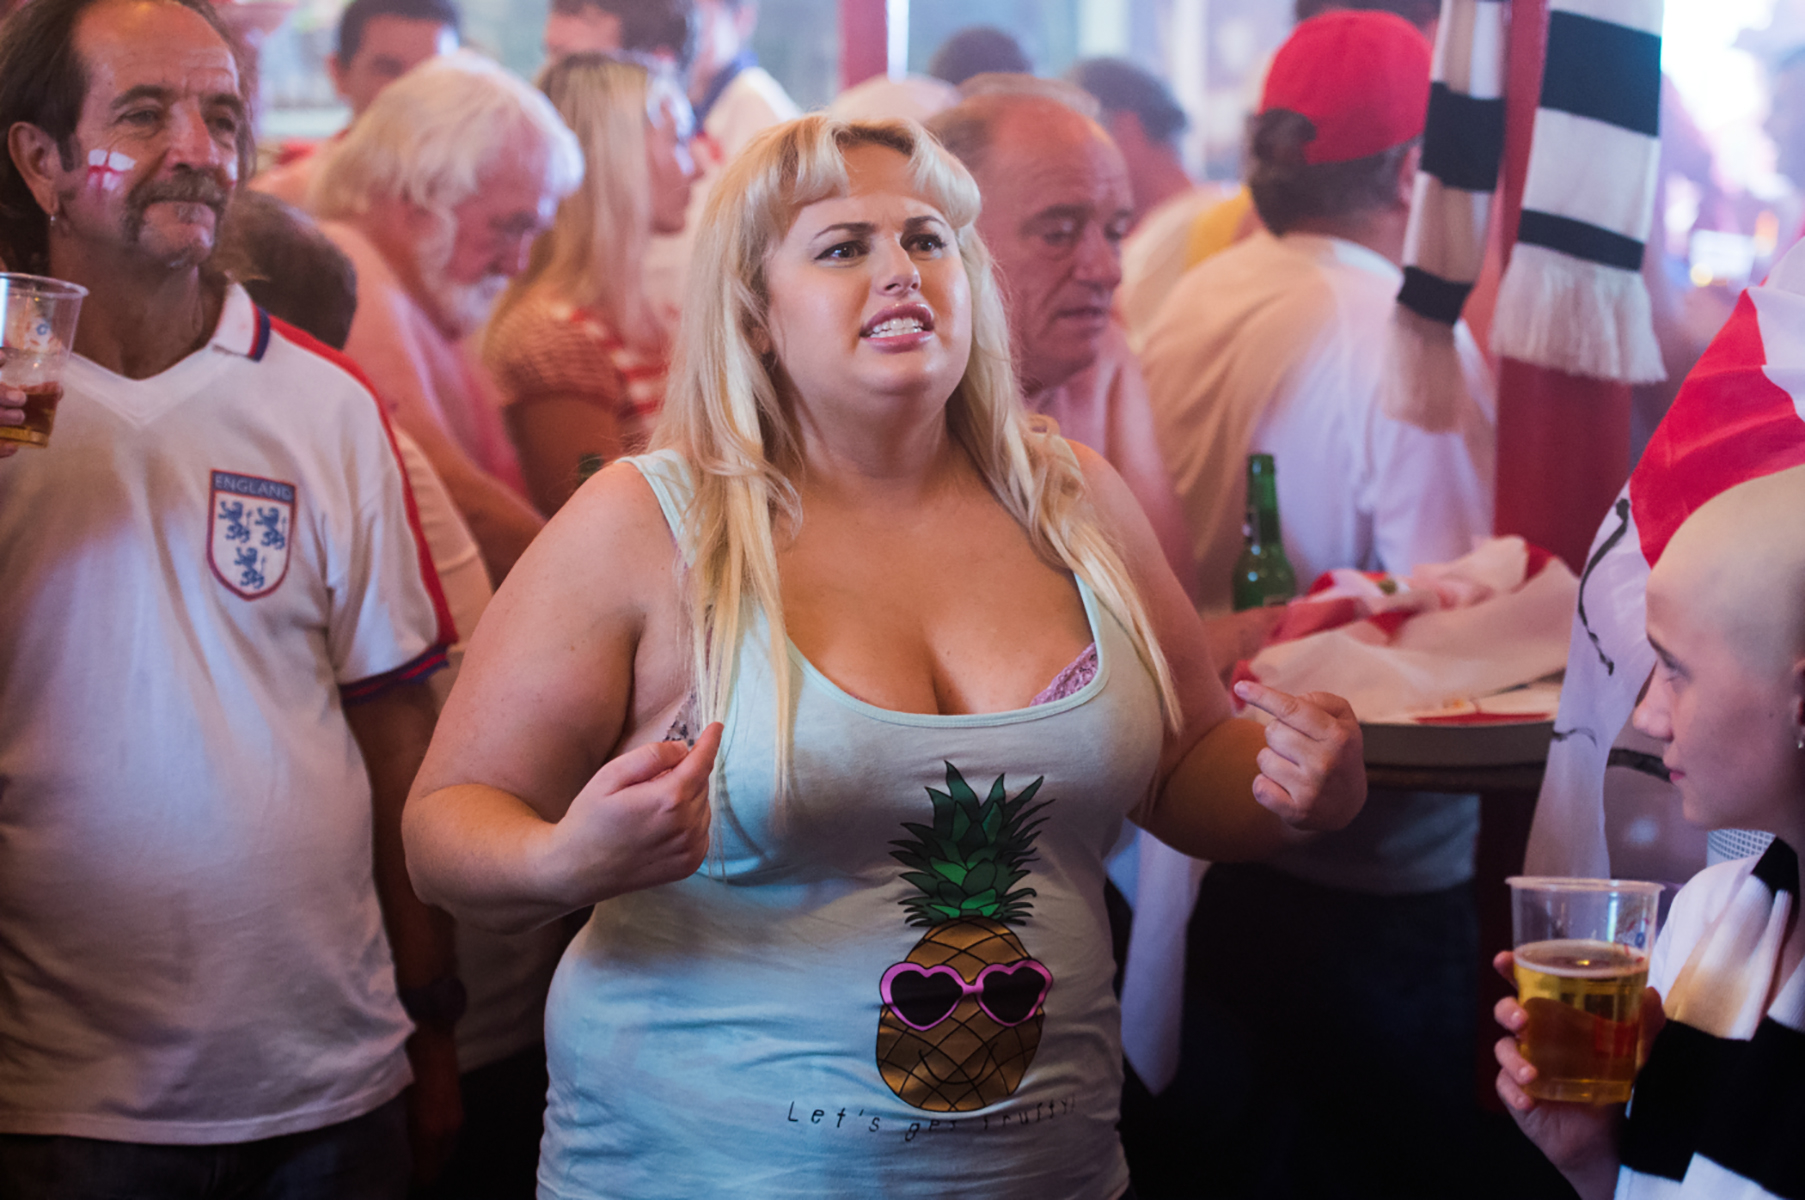 Woman in tank top with pineapple design among crowd of English football fans